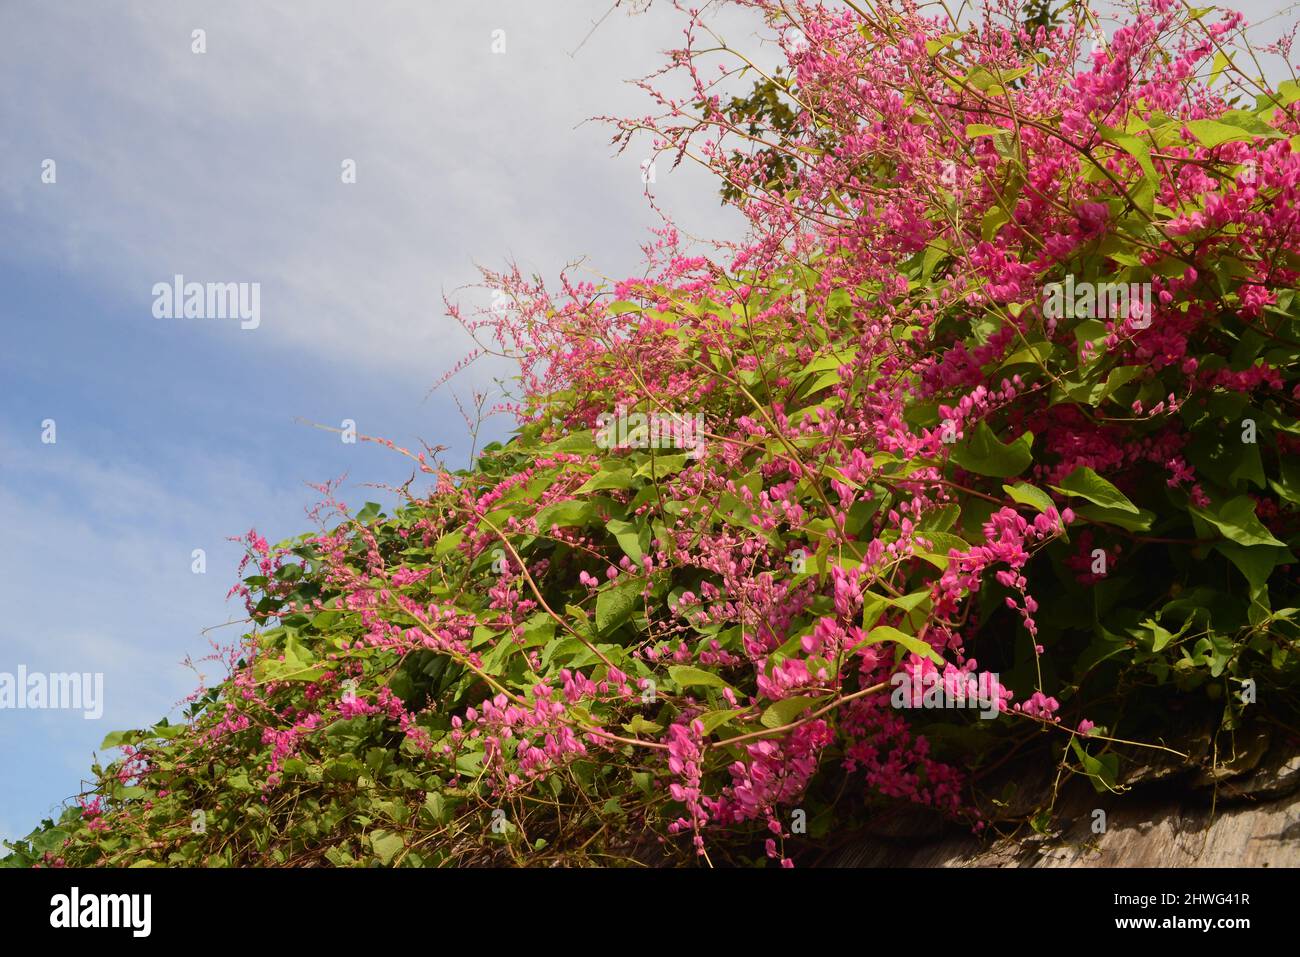 Chain of Love, Confederate Vinem, Coral Vine, Hearts on a Chain, Honolulu Creeper, Mexican Creeper, Mountain Rose, Pink Vine Stock Photo